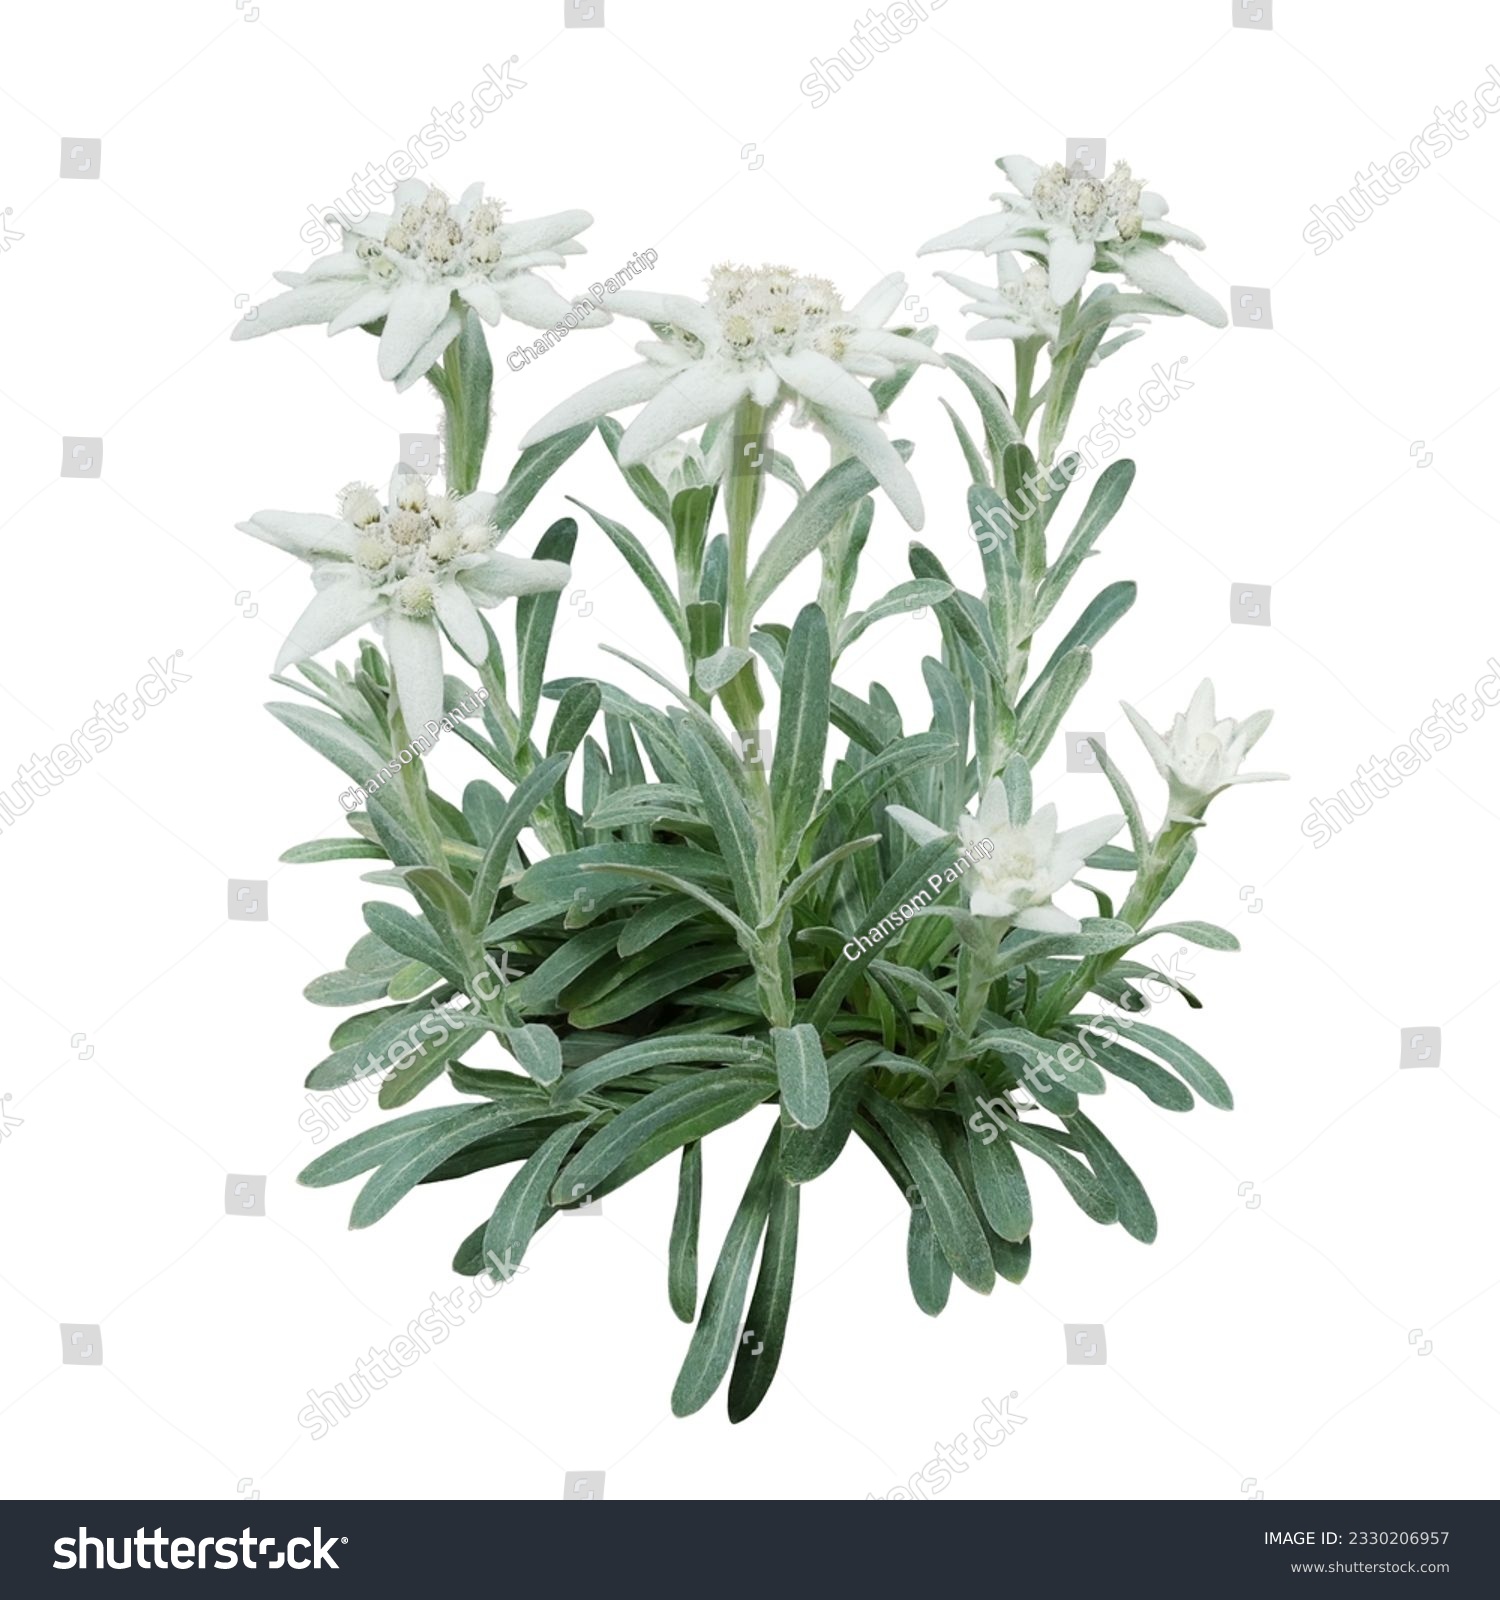 Edelweiss flowers with furry petals and leaves on white background. Edelweiss is a mountain flower rare flowering plant in Leontopodium genus belonging to the daisy family native to the European Alps #2330206957